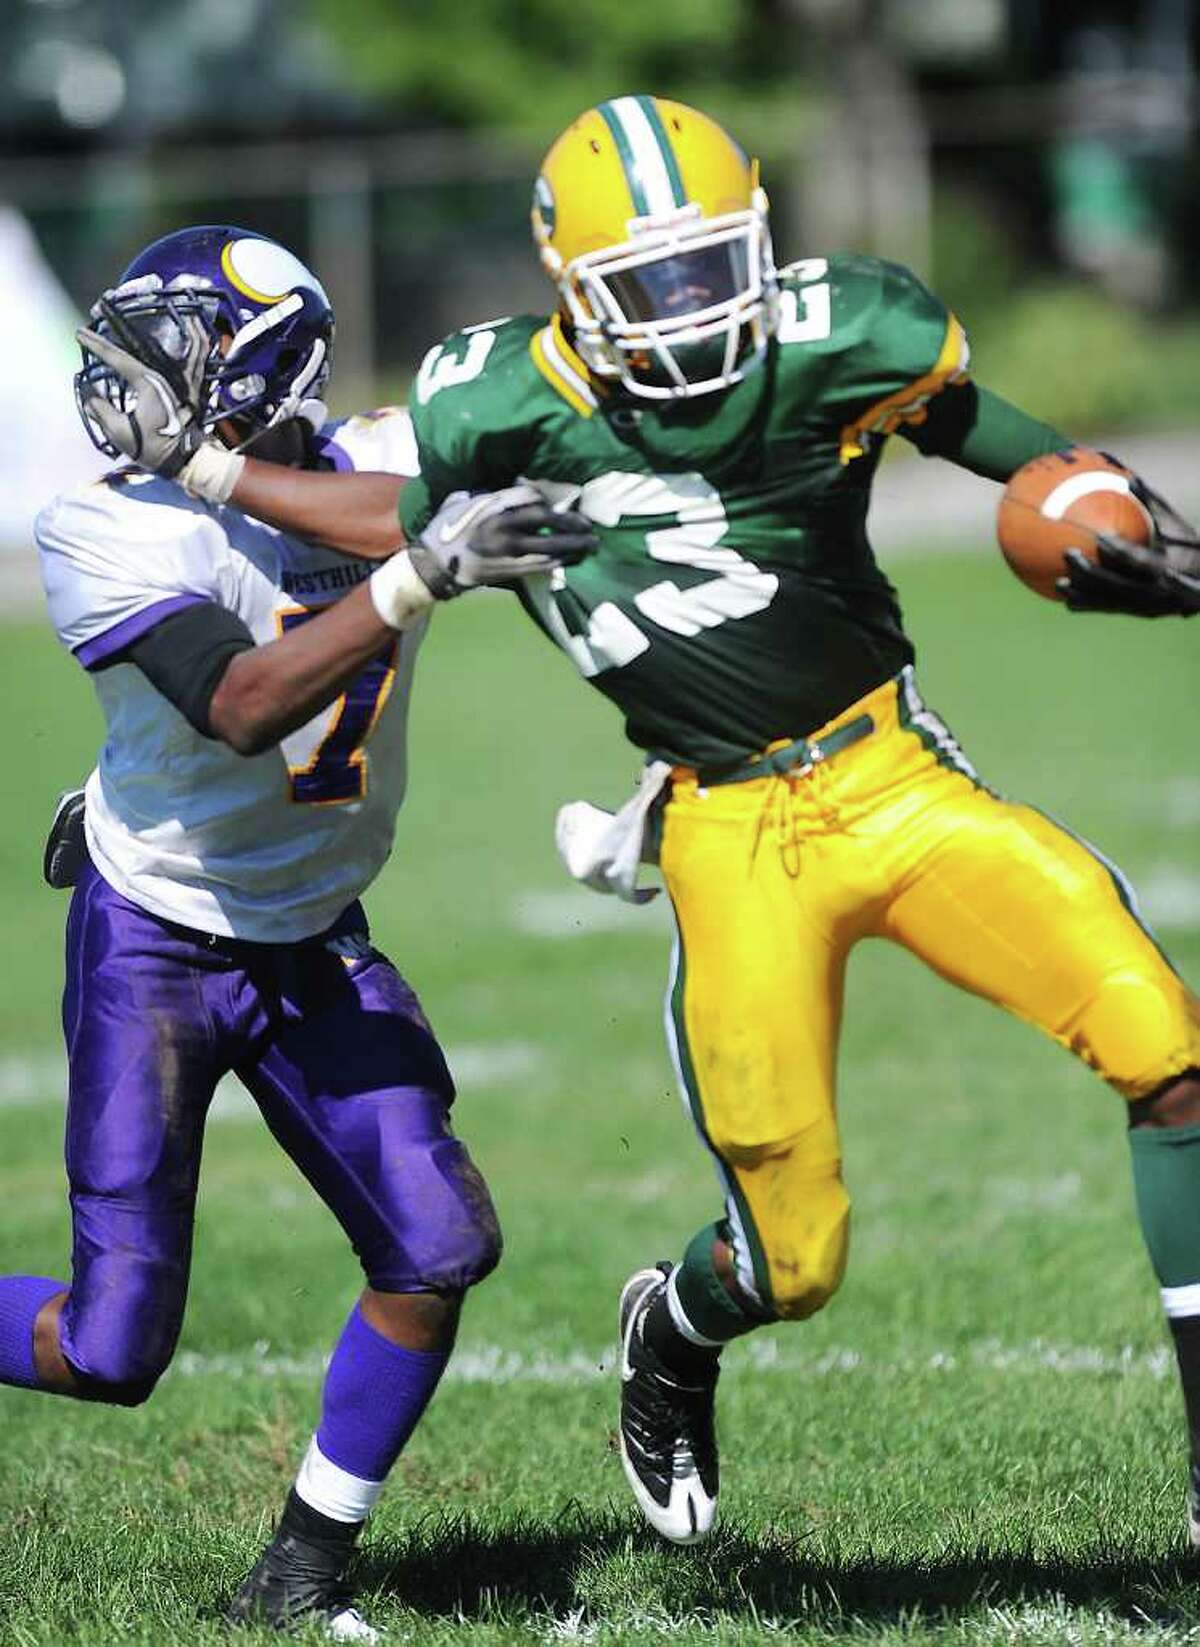 Trinity Catholic High School's Tre Crumbley carries the ball with pressure from Westhill High School's Kieran Bowman in city rivalry football action at Trinity in Stamford, Conn. on Saturday October 2, 2010.